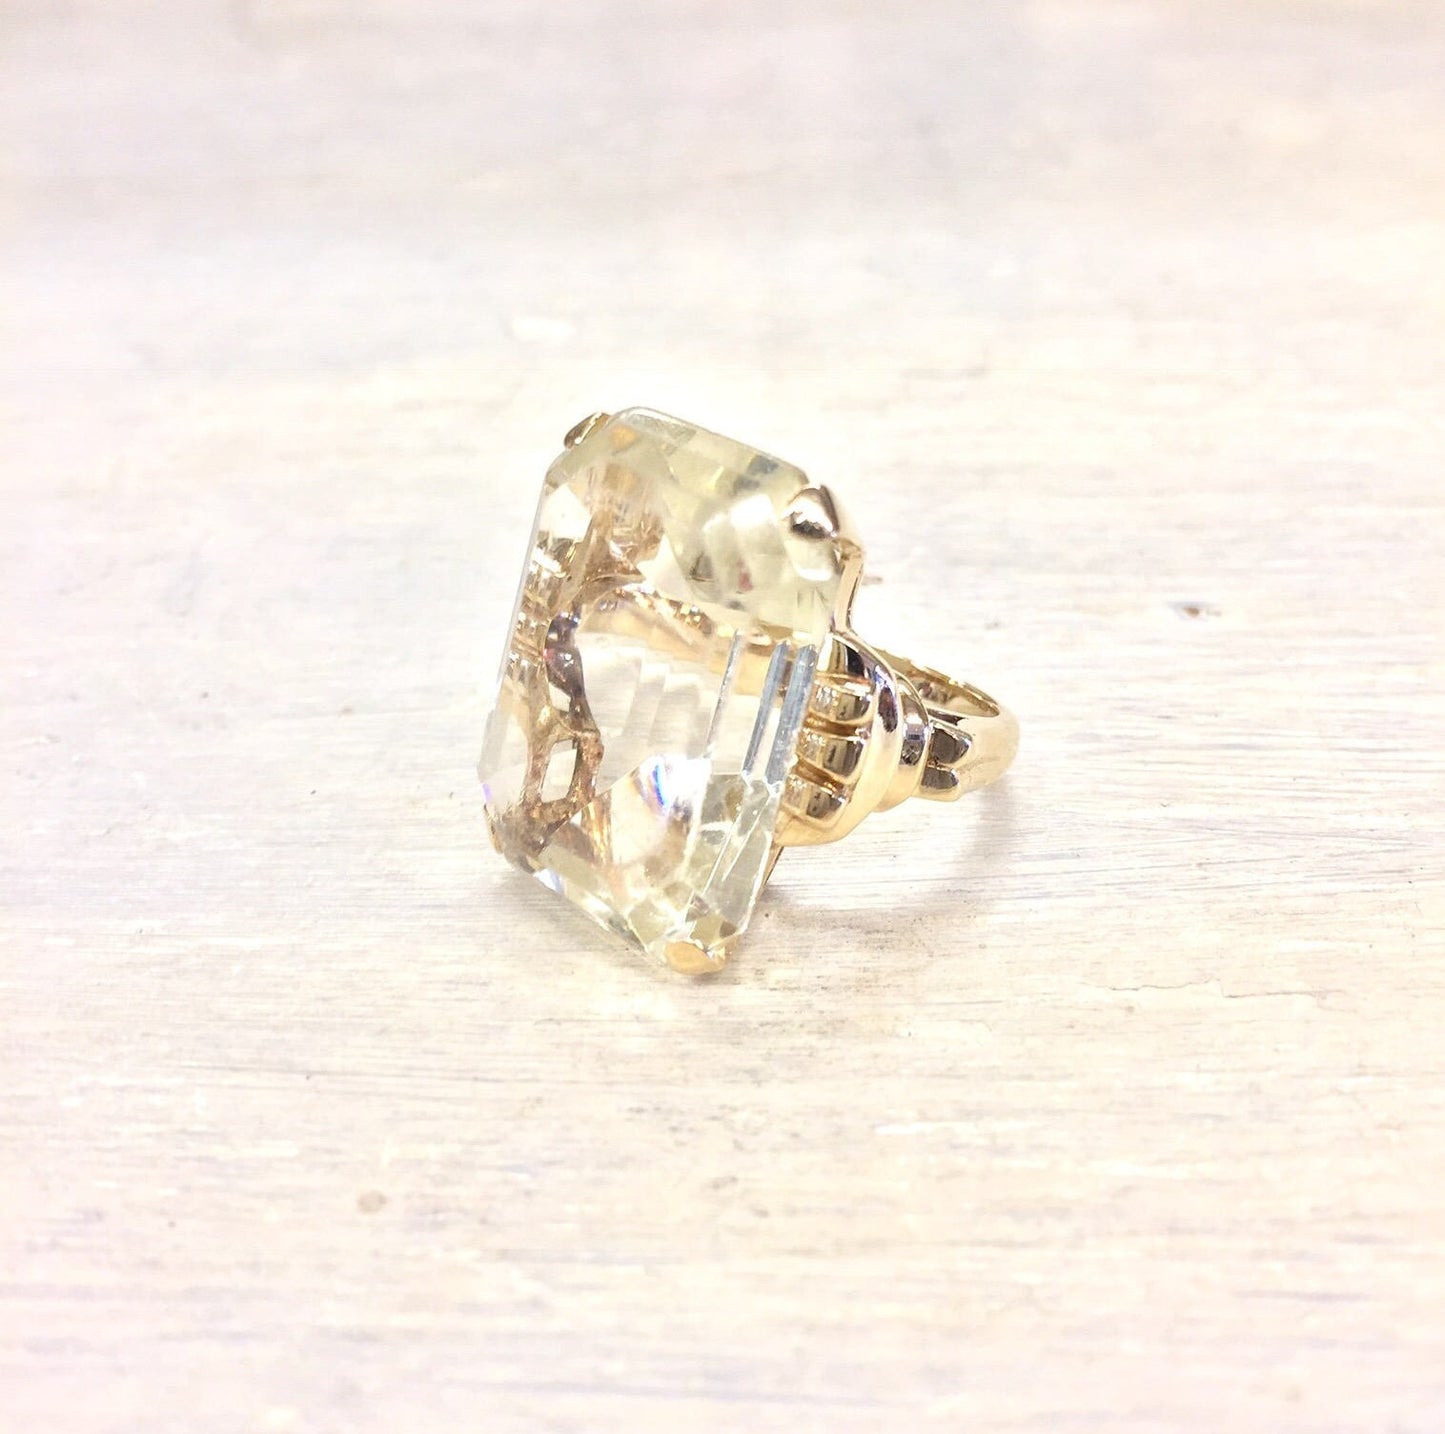 14 karat gold vintage cocktail ring with large rectangular faceted clear gemstone on white background